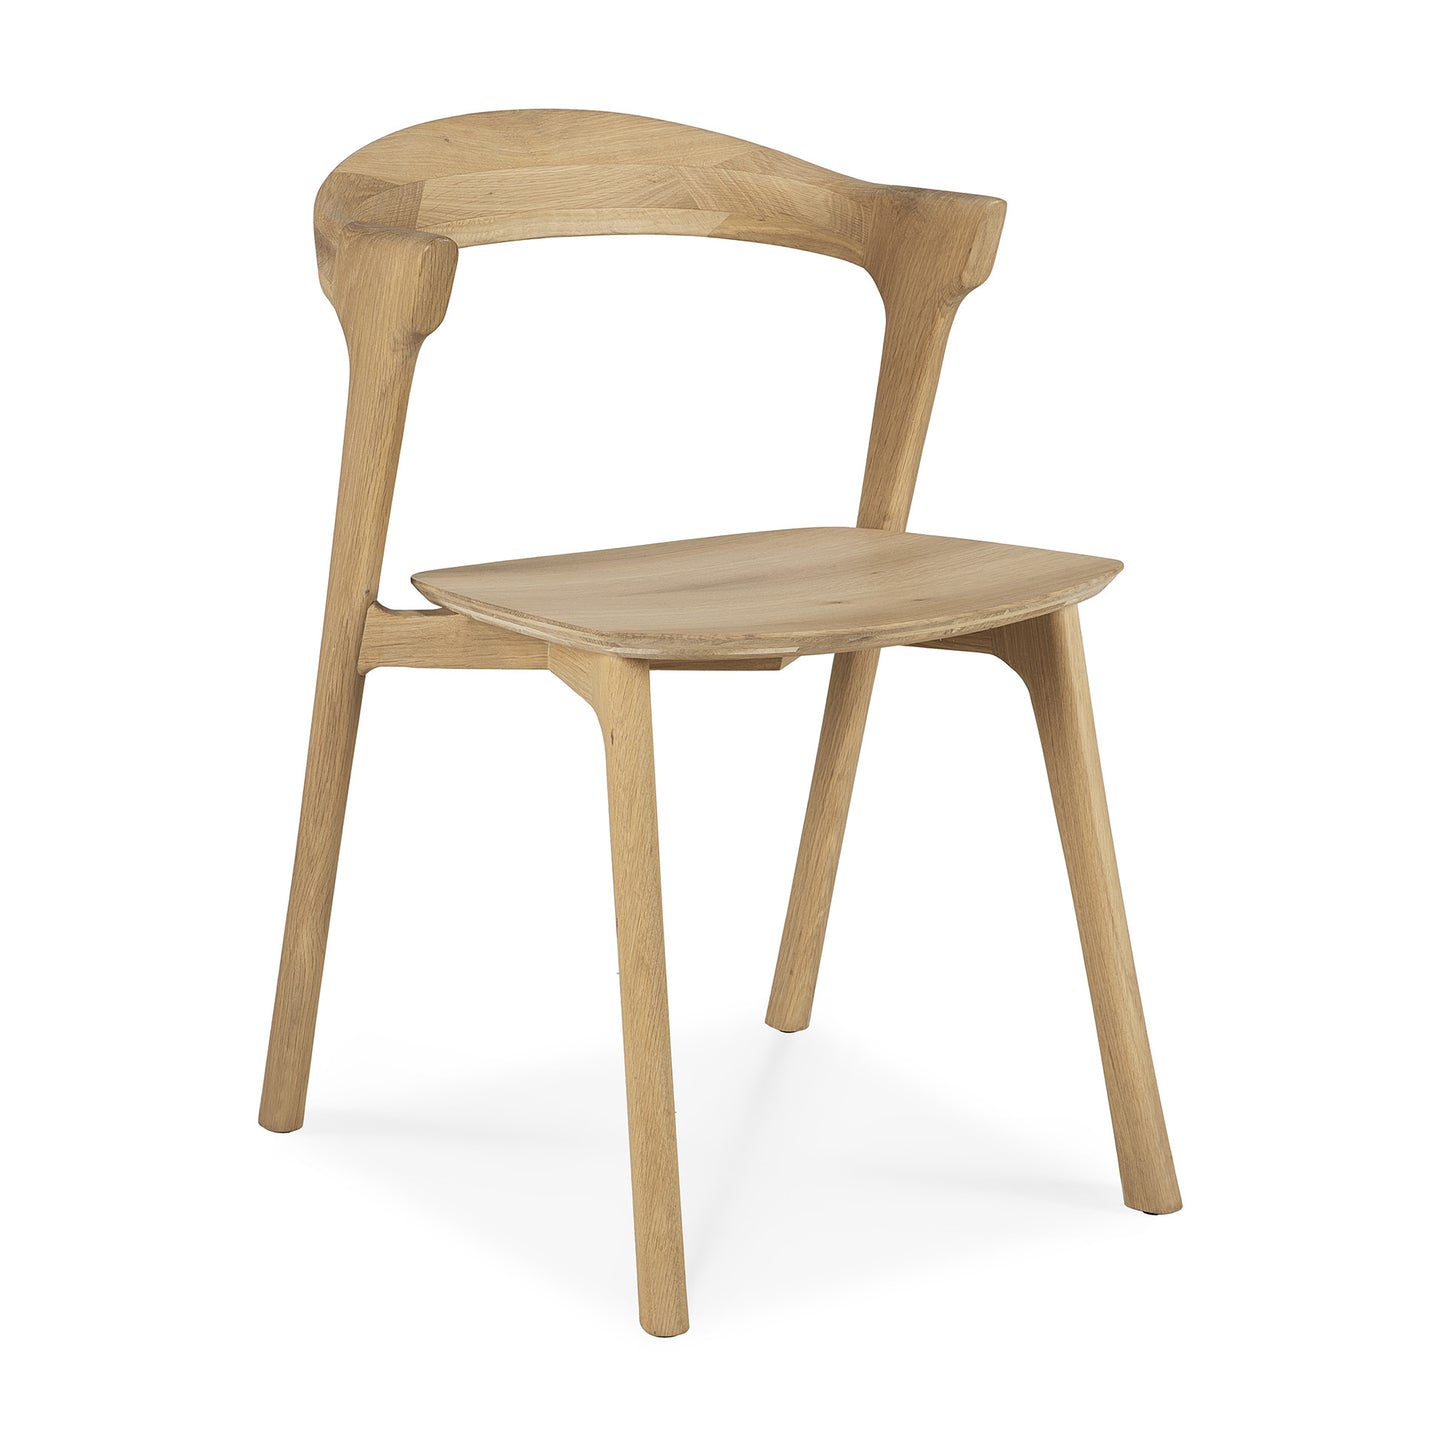 Ethnicraft Oak Bok Dining Chair is available from Make Your House A Home, Bendigo, Victoria, Australia